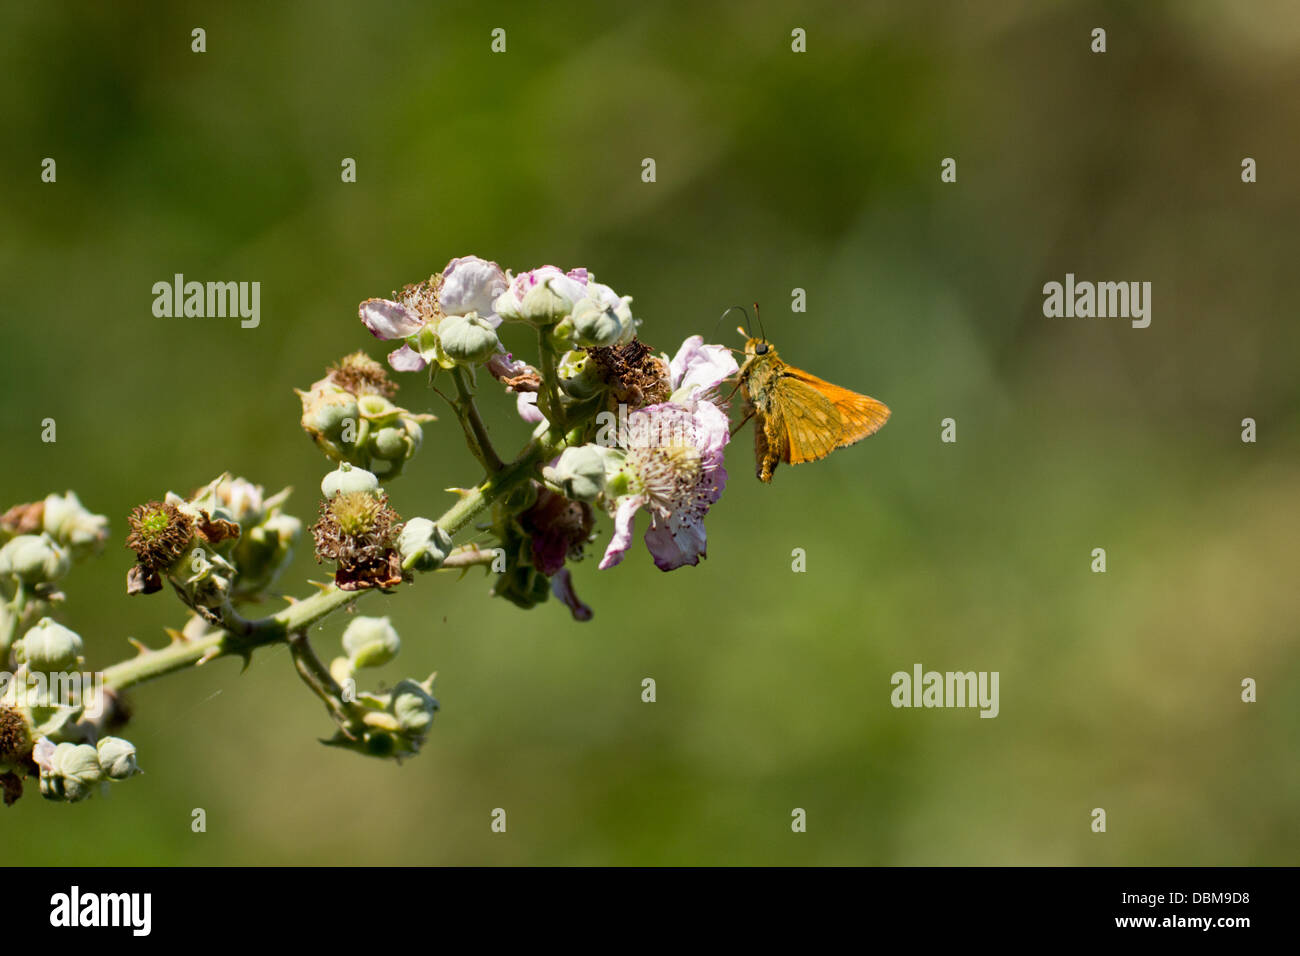 Hanningfield, Essex, UK. 1st August, 2013. A large skipper butterfly feeds on bramble flowers in Hanningfield, Essex, UK. Temperatures forecast to reach 32 degrees today as the summer sun returns. Credit:  Chris Pringle and Rebecca Andrews/Alamy Live News Stock Photo